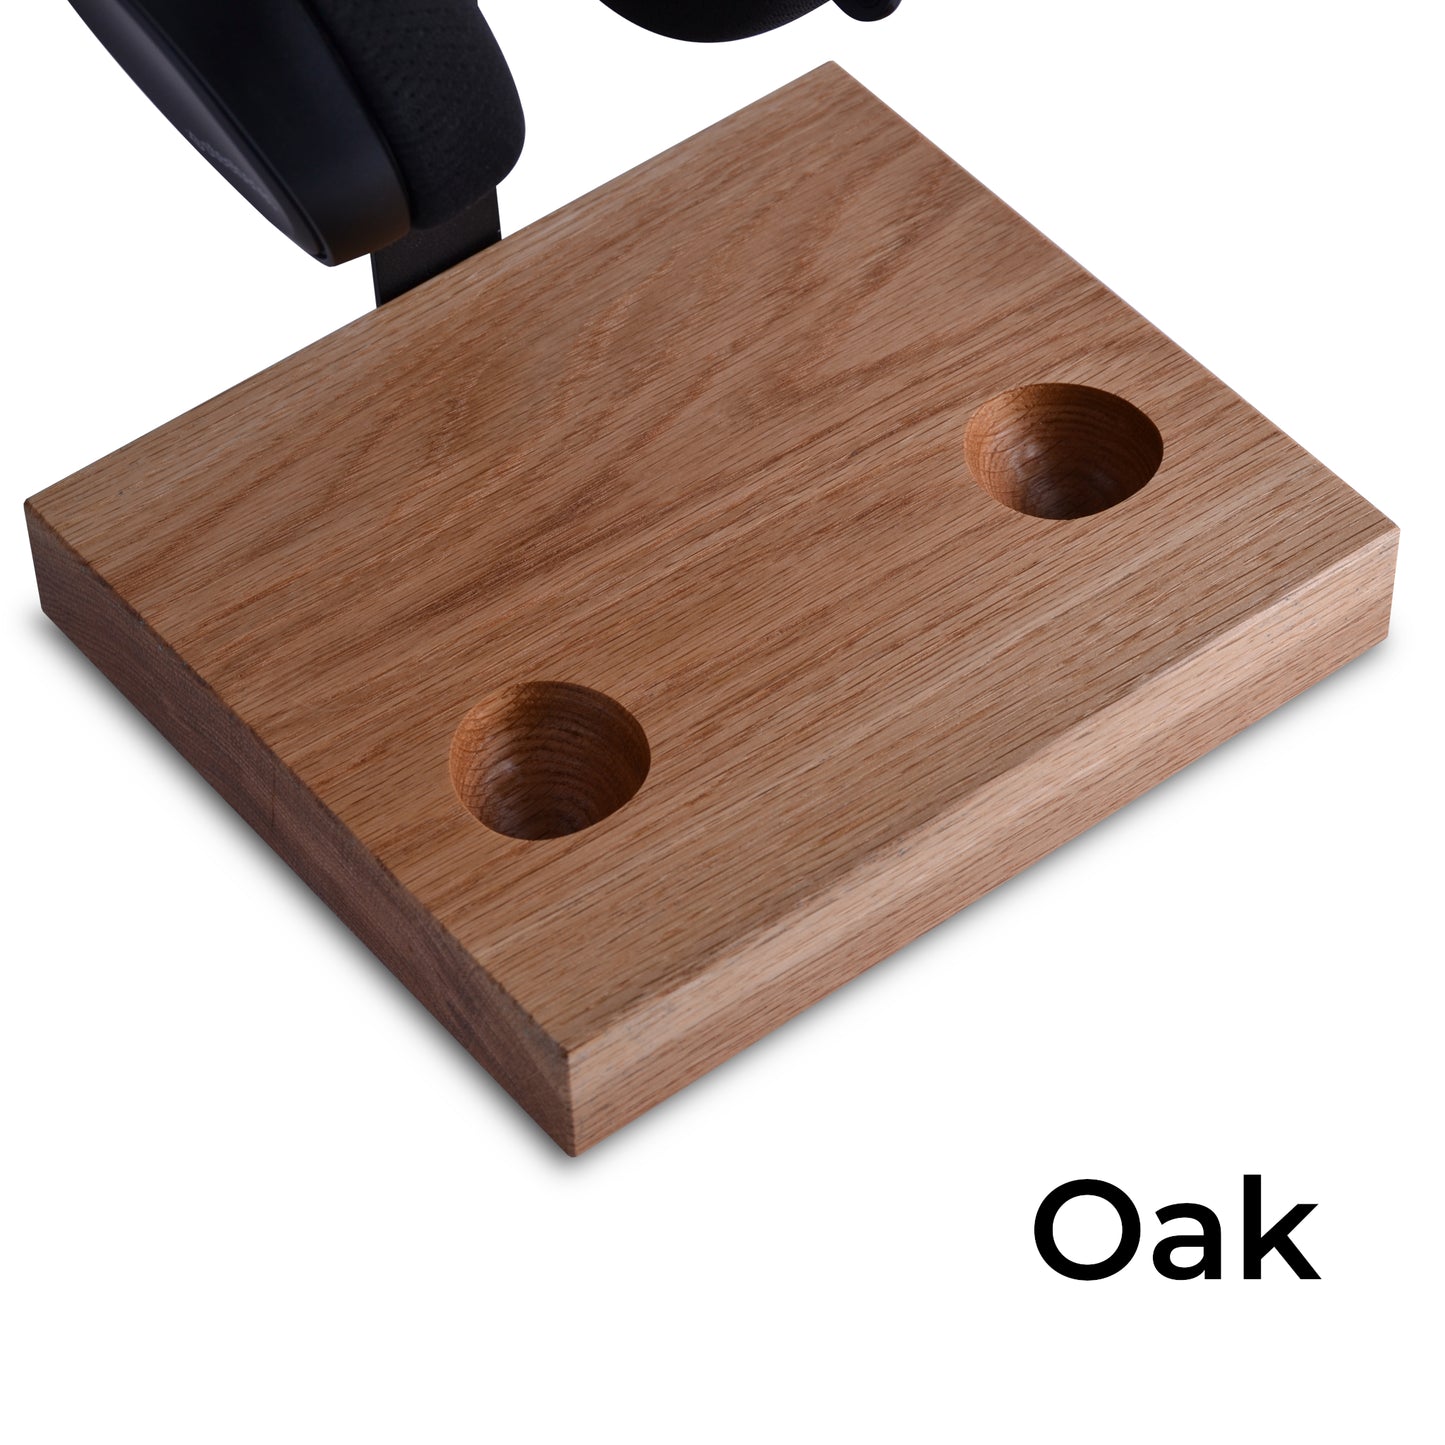 Oak version of headset and controller stand for Playstation 4 dualshock controller